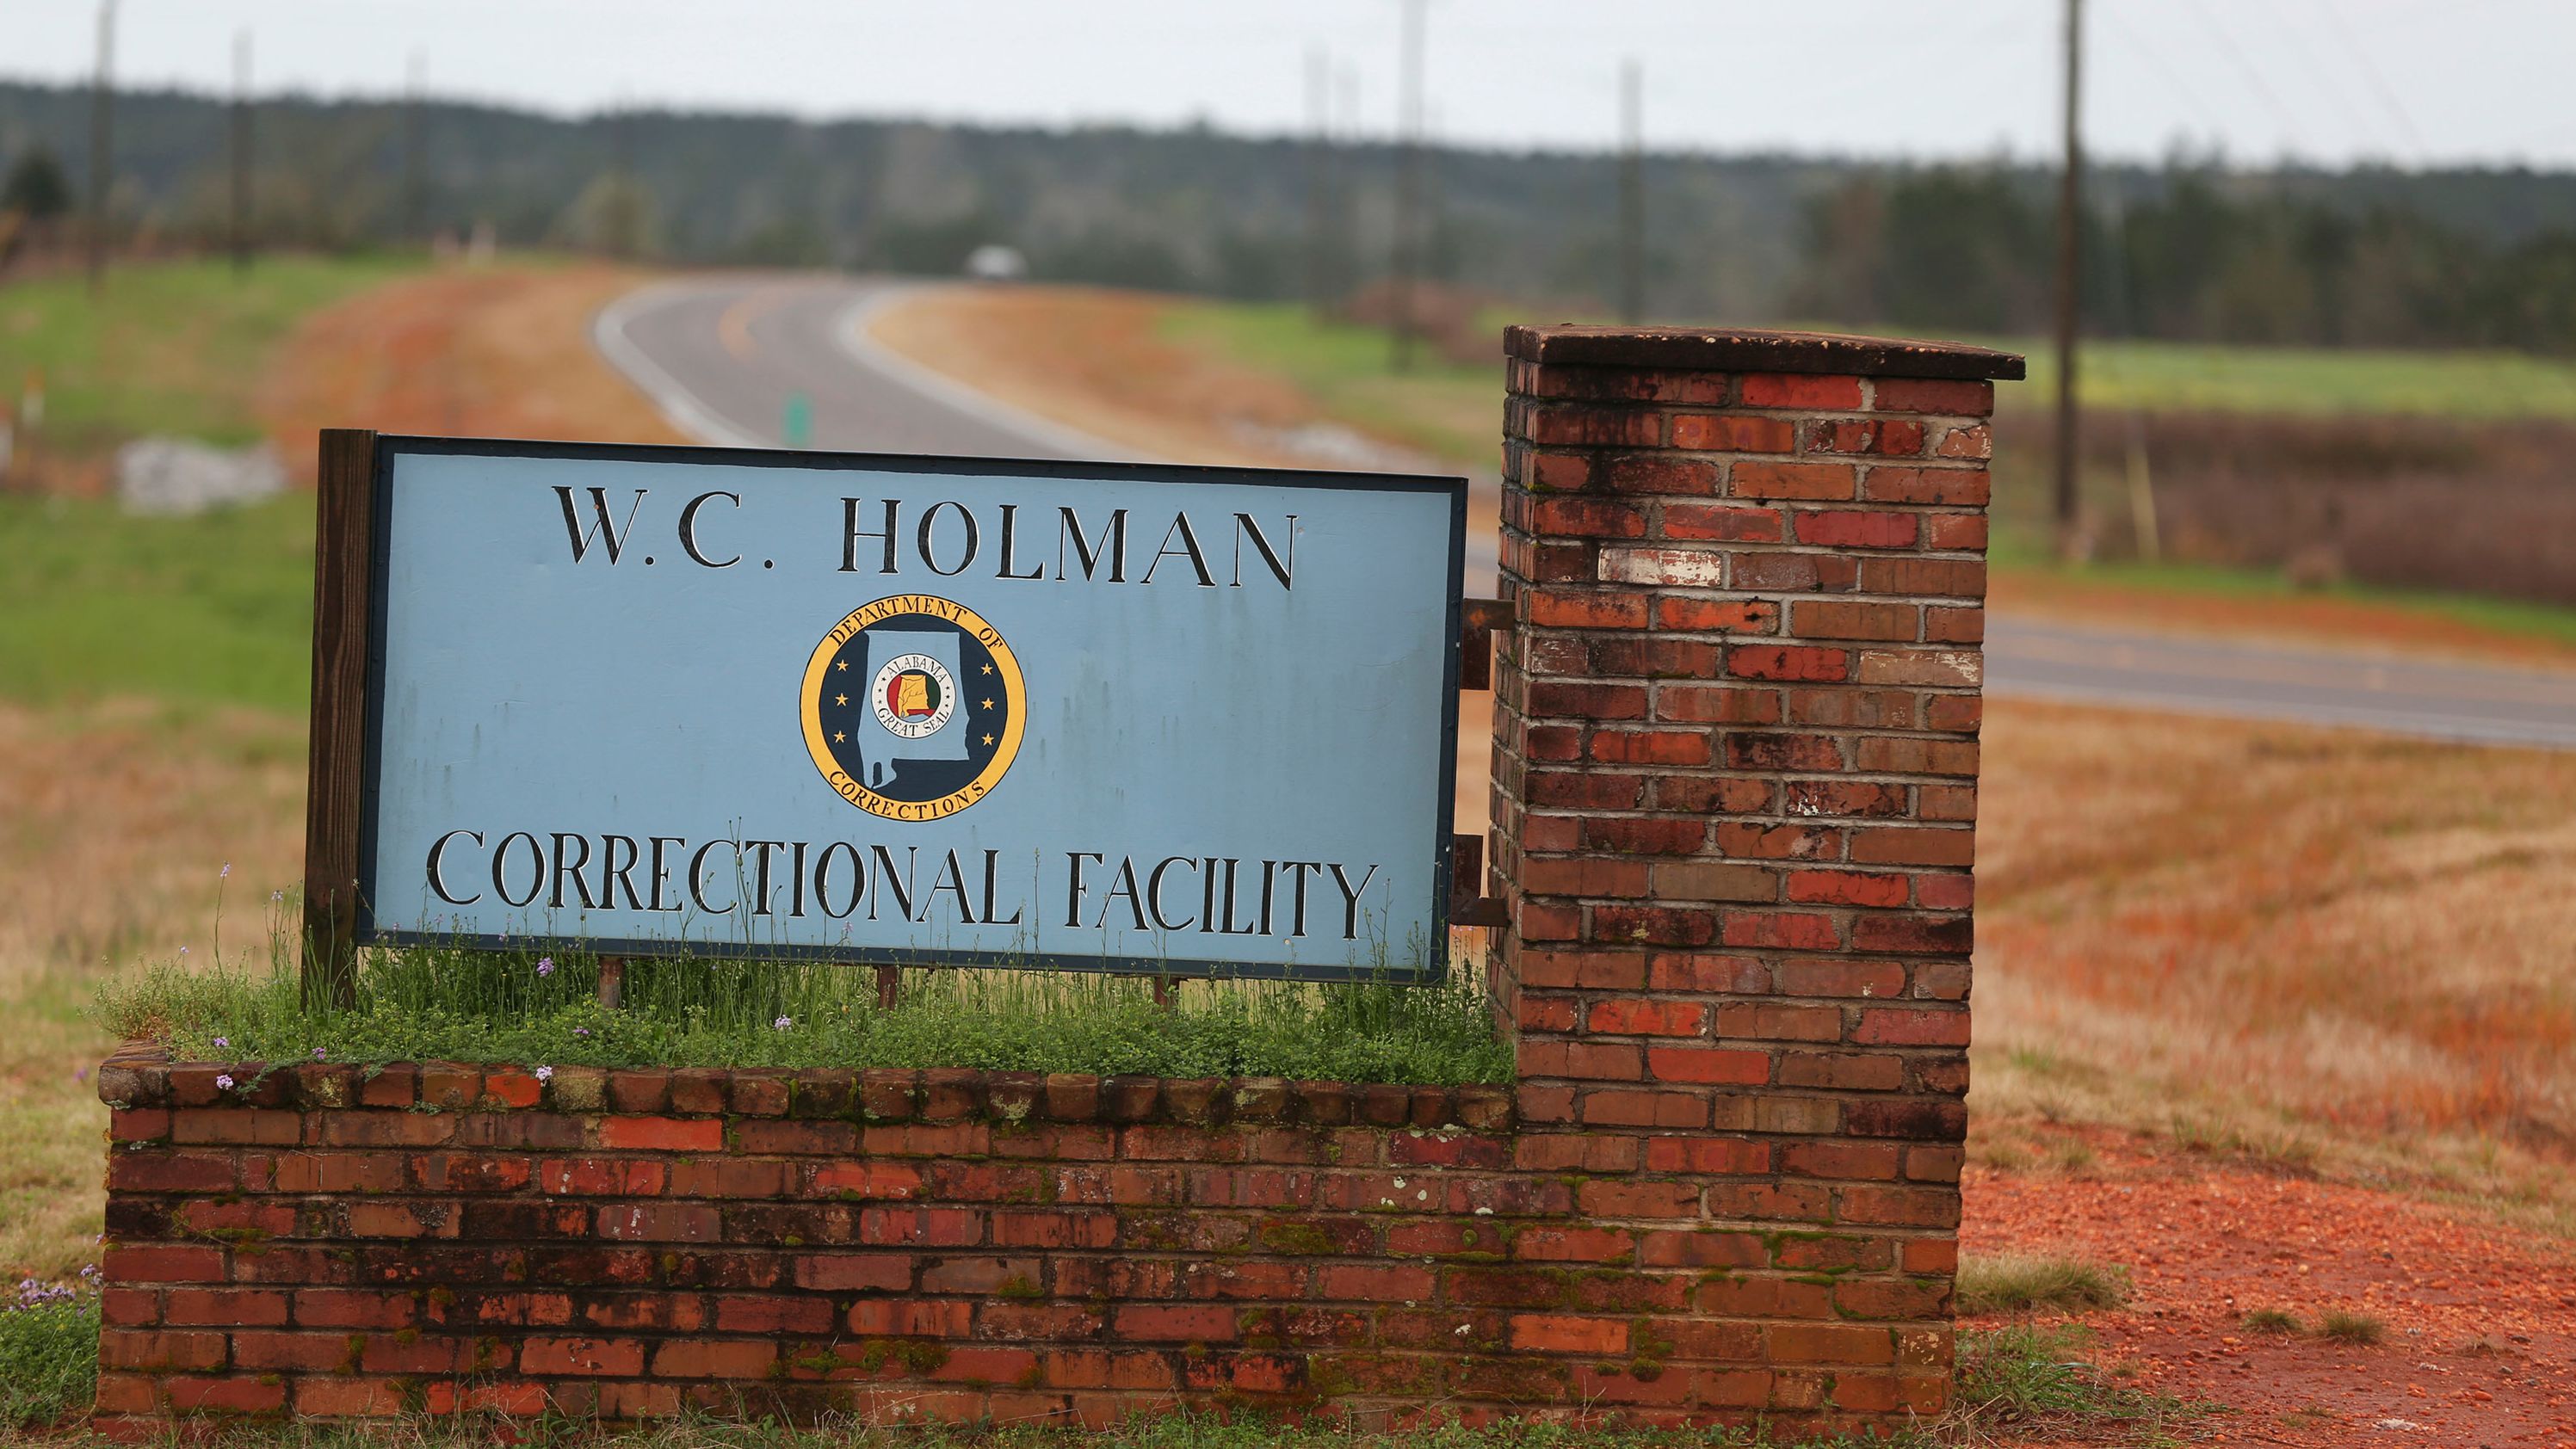 Willie B. Smith III was executed at The William C. Holman Correctional Facility in Atmore, Ala., on Thursday